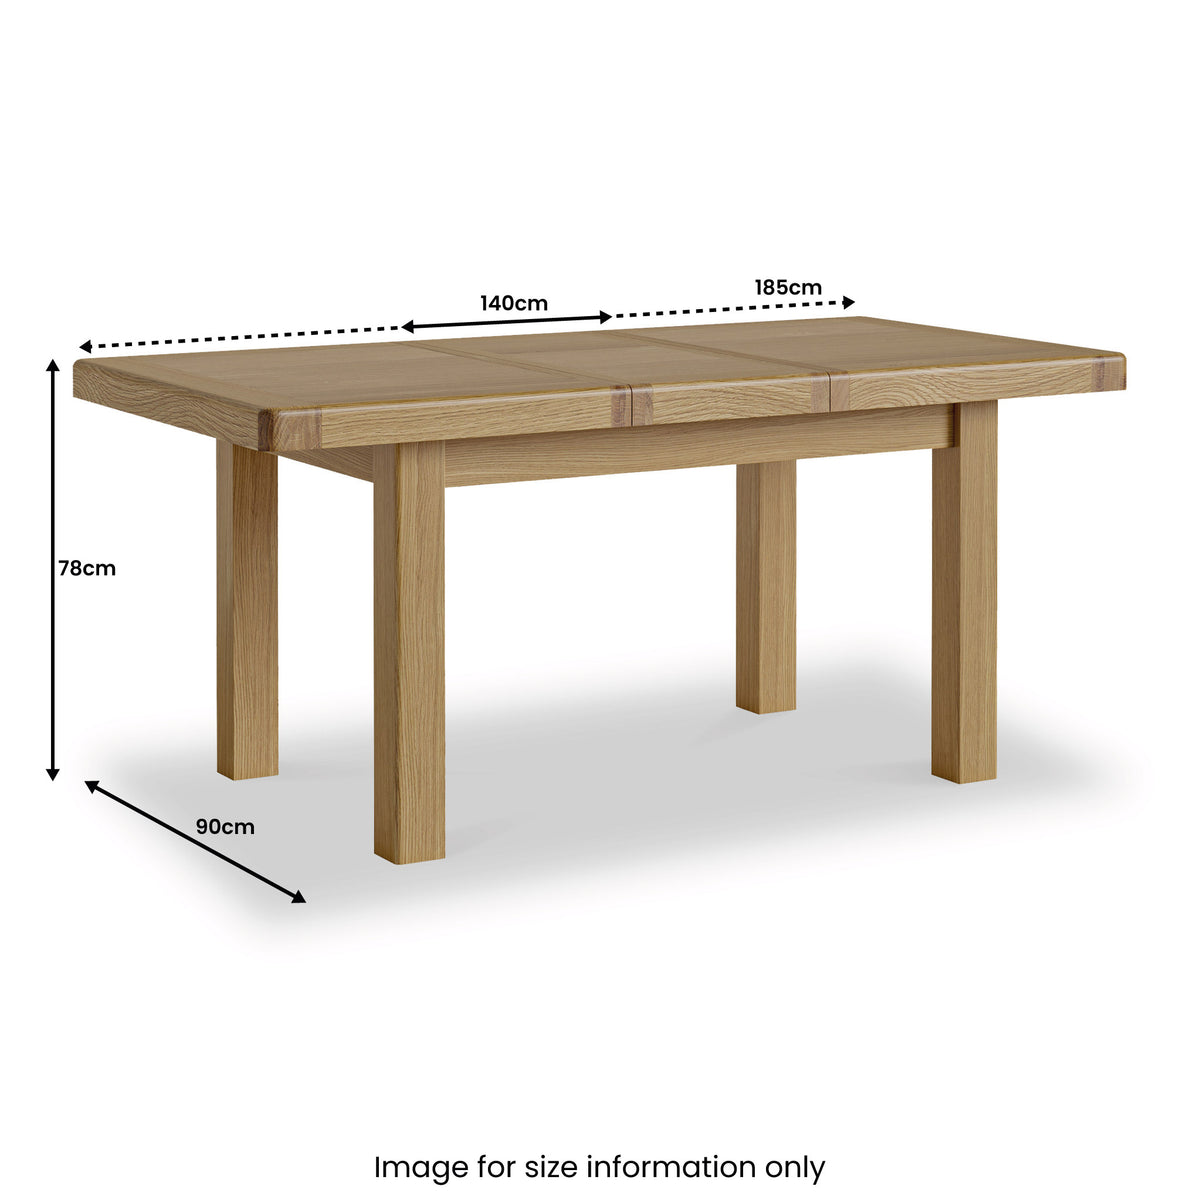 Portland Oak Small Extending Dining Table dimensions